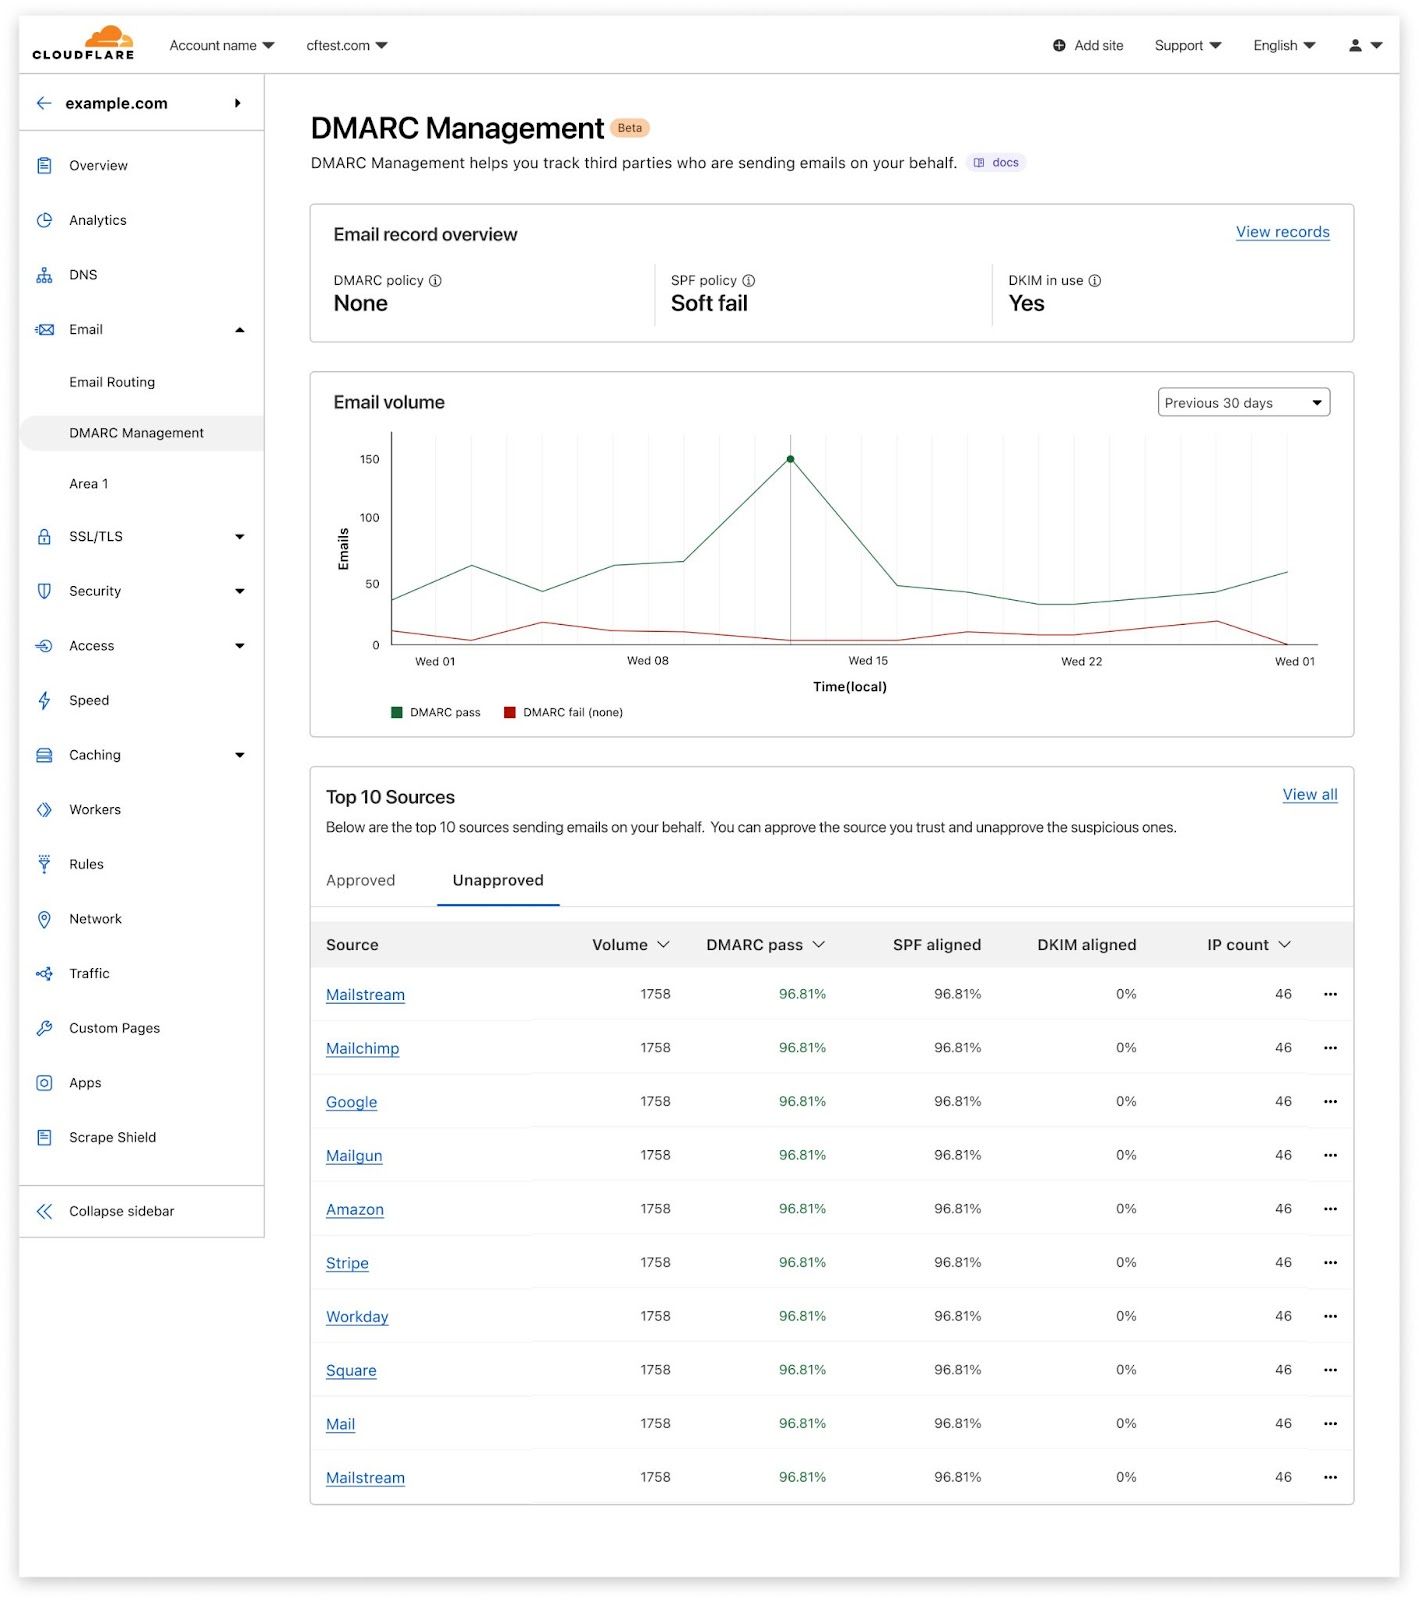 On the DMARC Management one can see trends of messages passing or failing DMARC, and a breakdown by sending client (source)